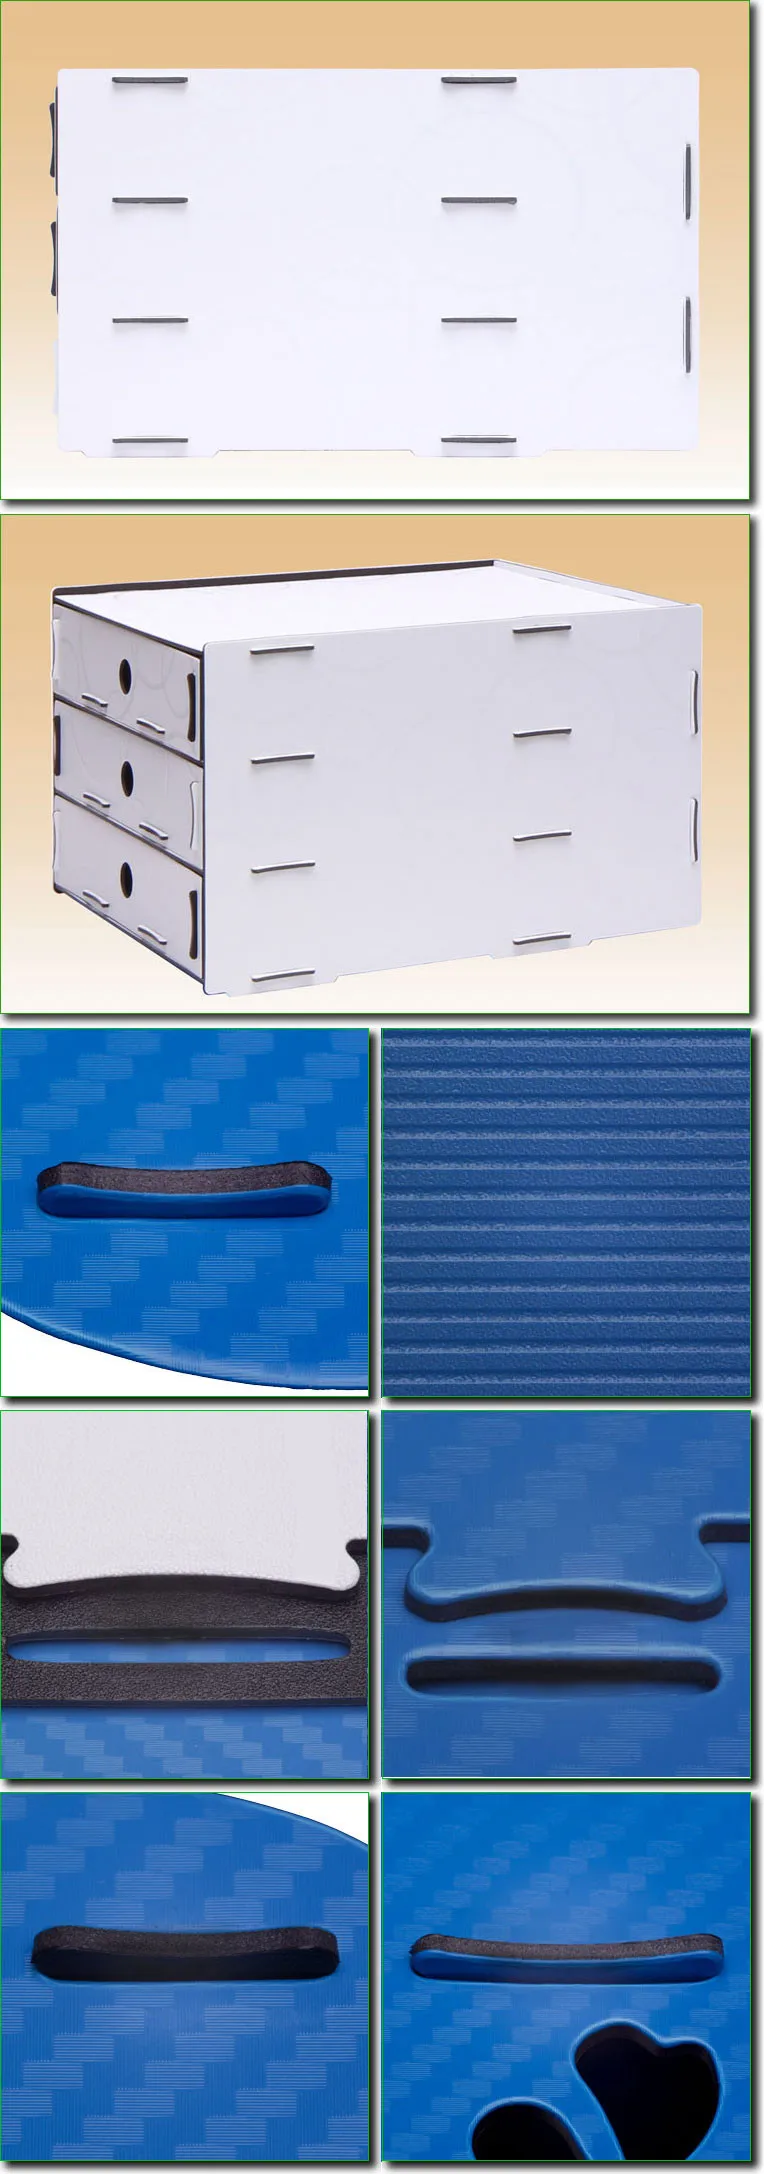 Collecting articles plastic storage box